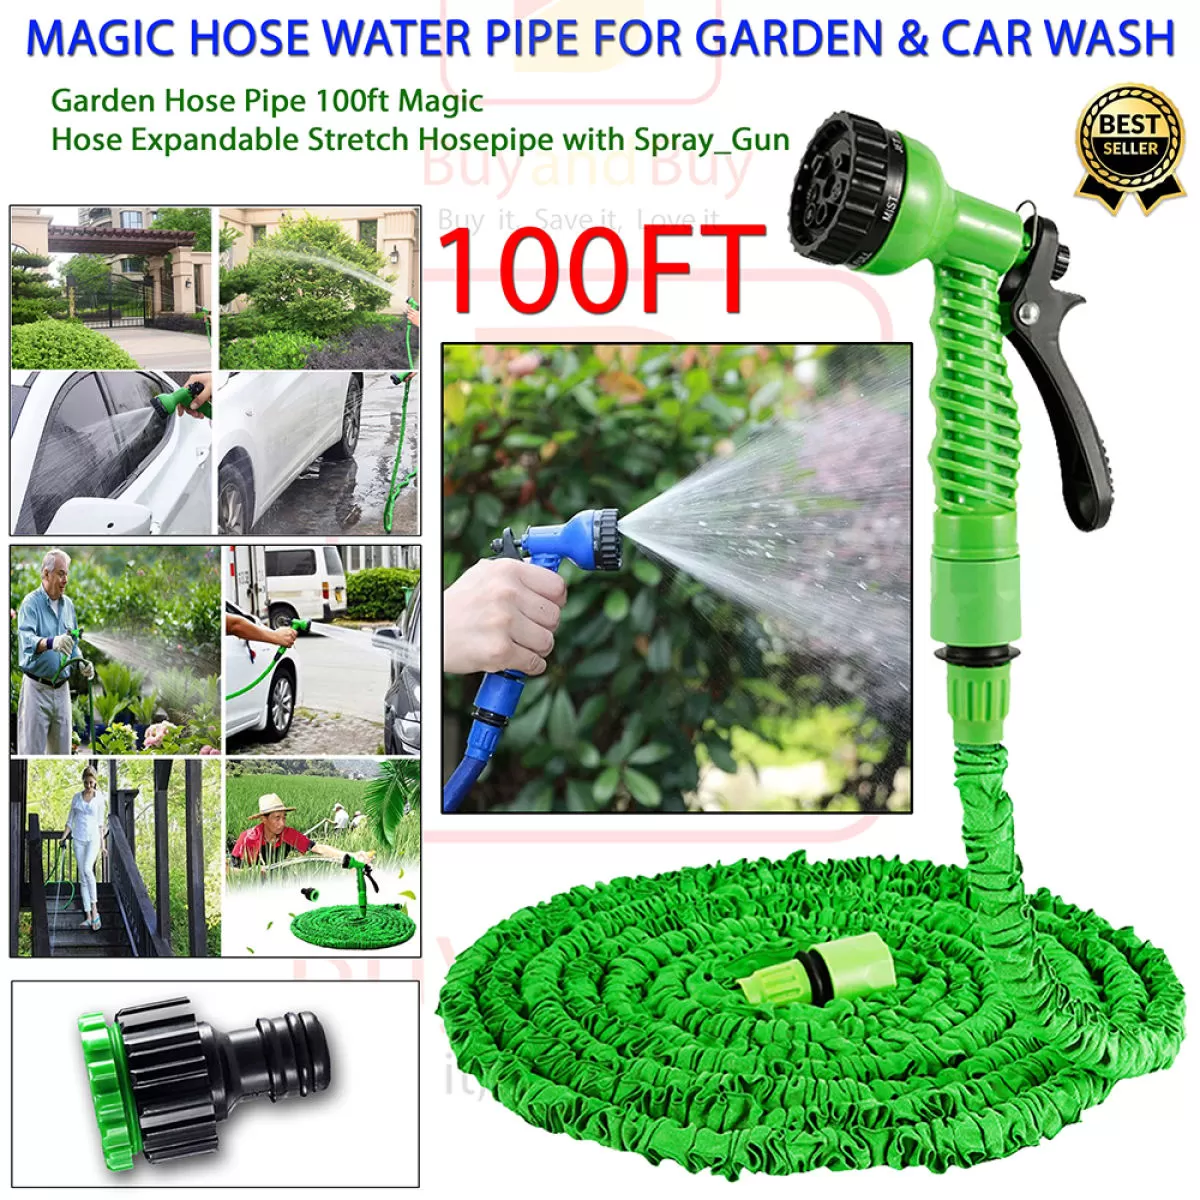 https://www.oshi.pk/images/products/magic-hose-water-pipe-for-garden--car-wash---100ft-13596-189.webp